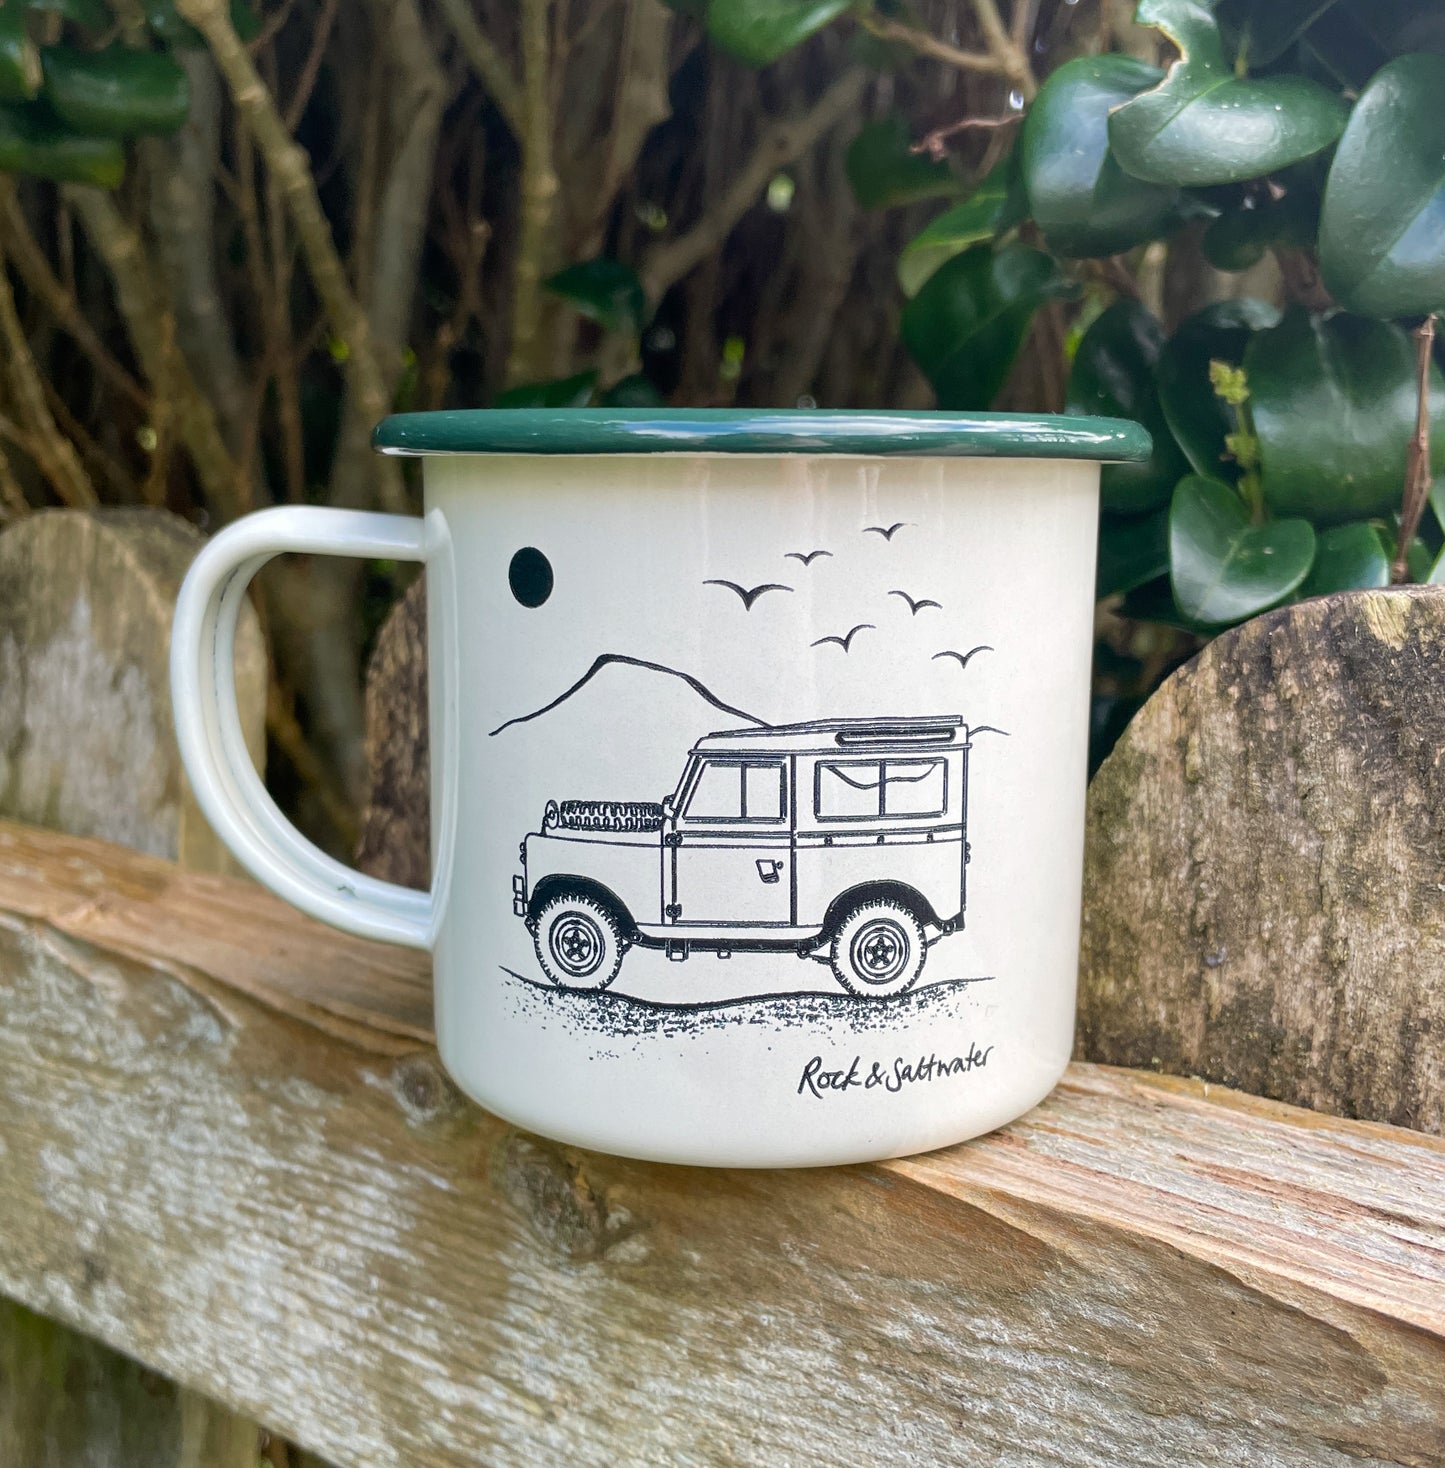 Set of 2 Land Rover with mountain scape enamel mugs